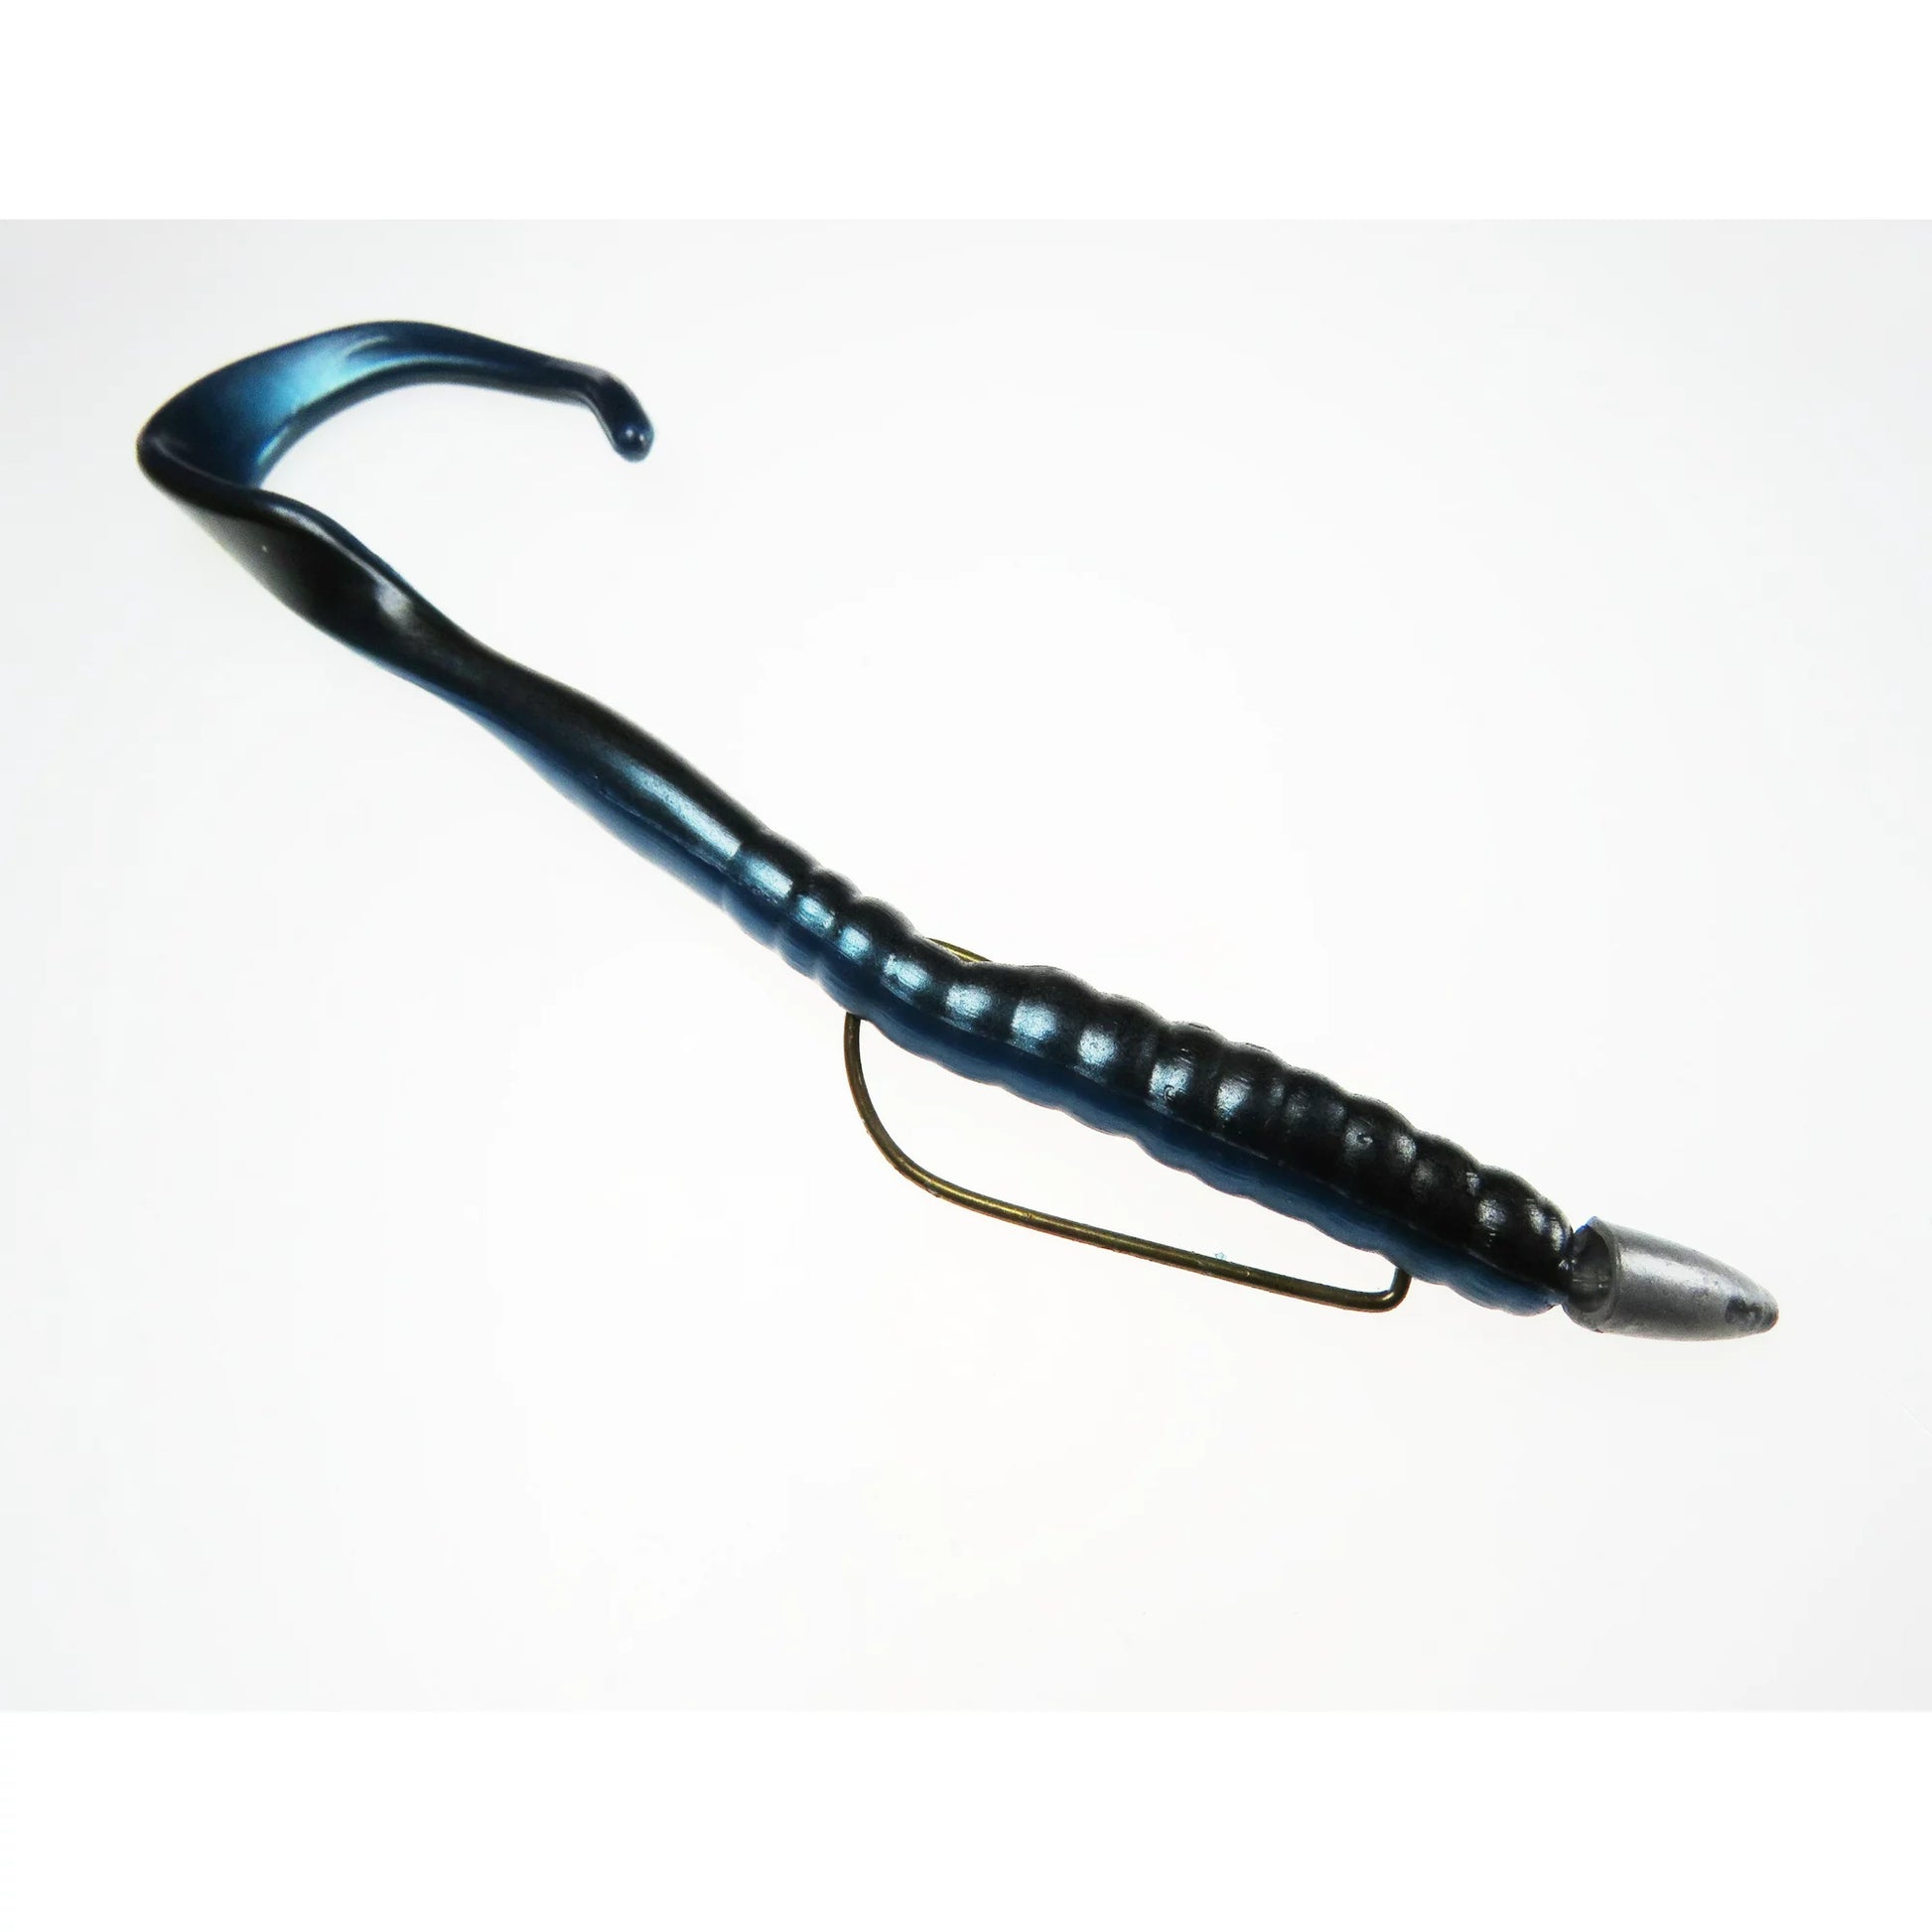 Super Strike Lures, Inc. - Happy Halloween!  Let's do a Giveaway! To  enter: tell us a Halloween rhyme! ieTrick or treat, smell my feet. Give  the big bass a tasty darter